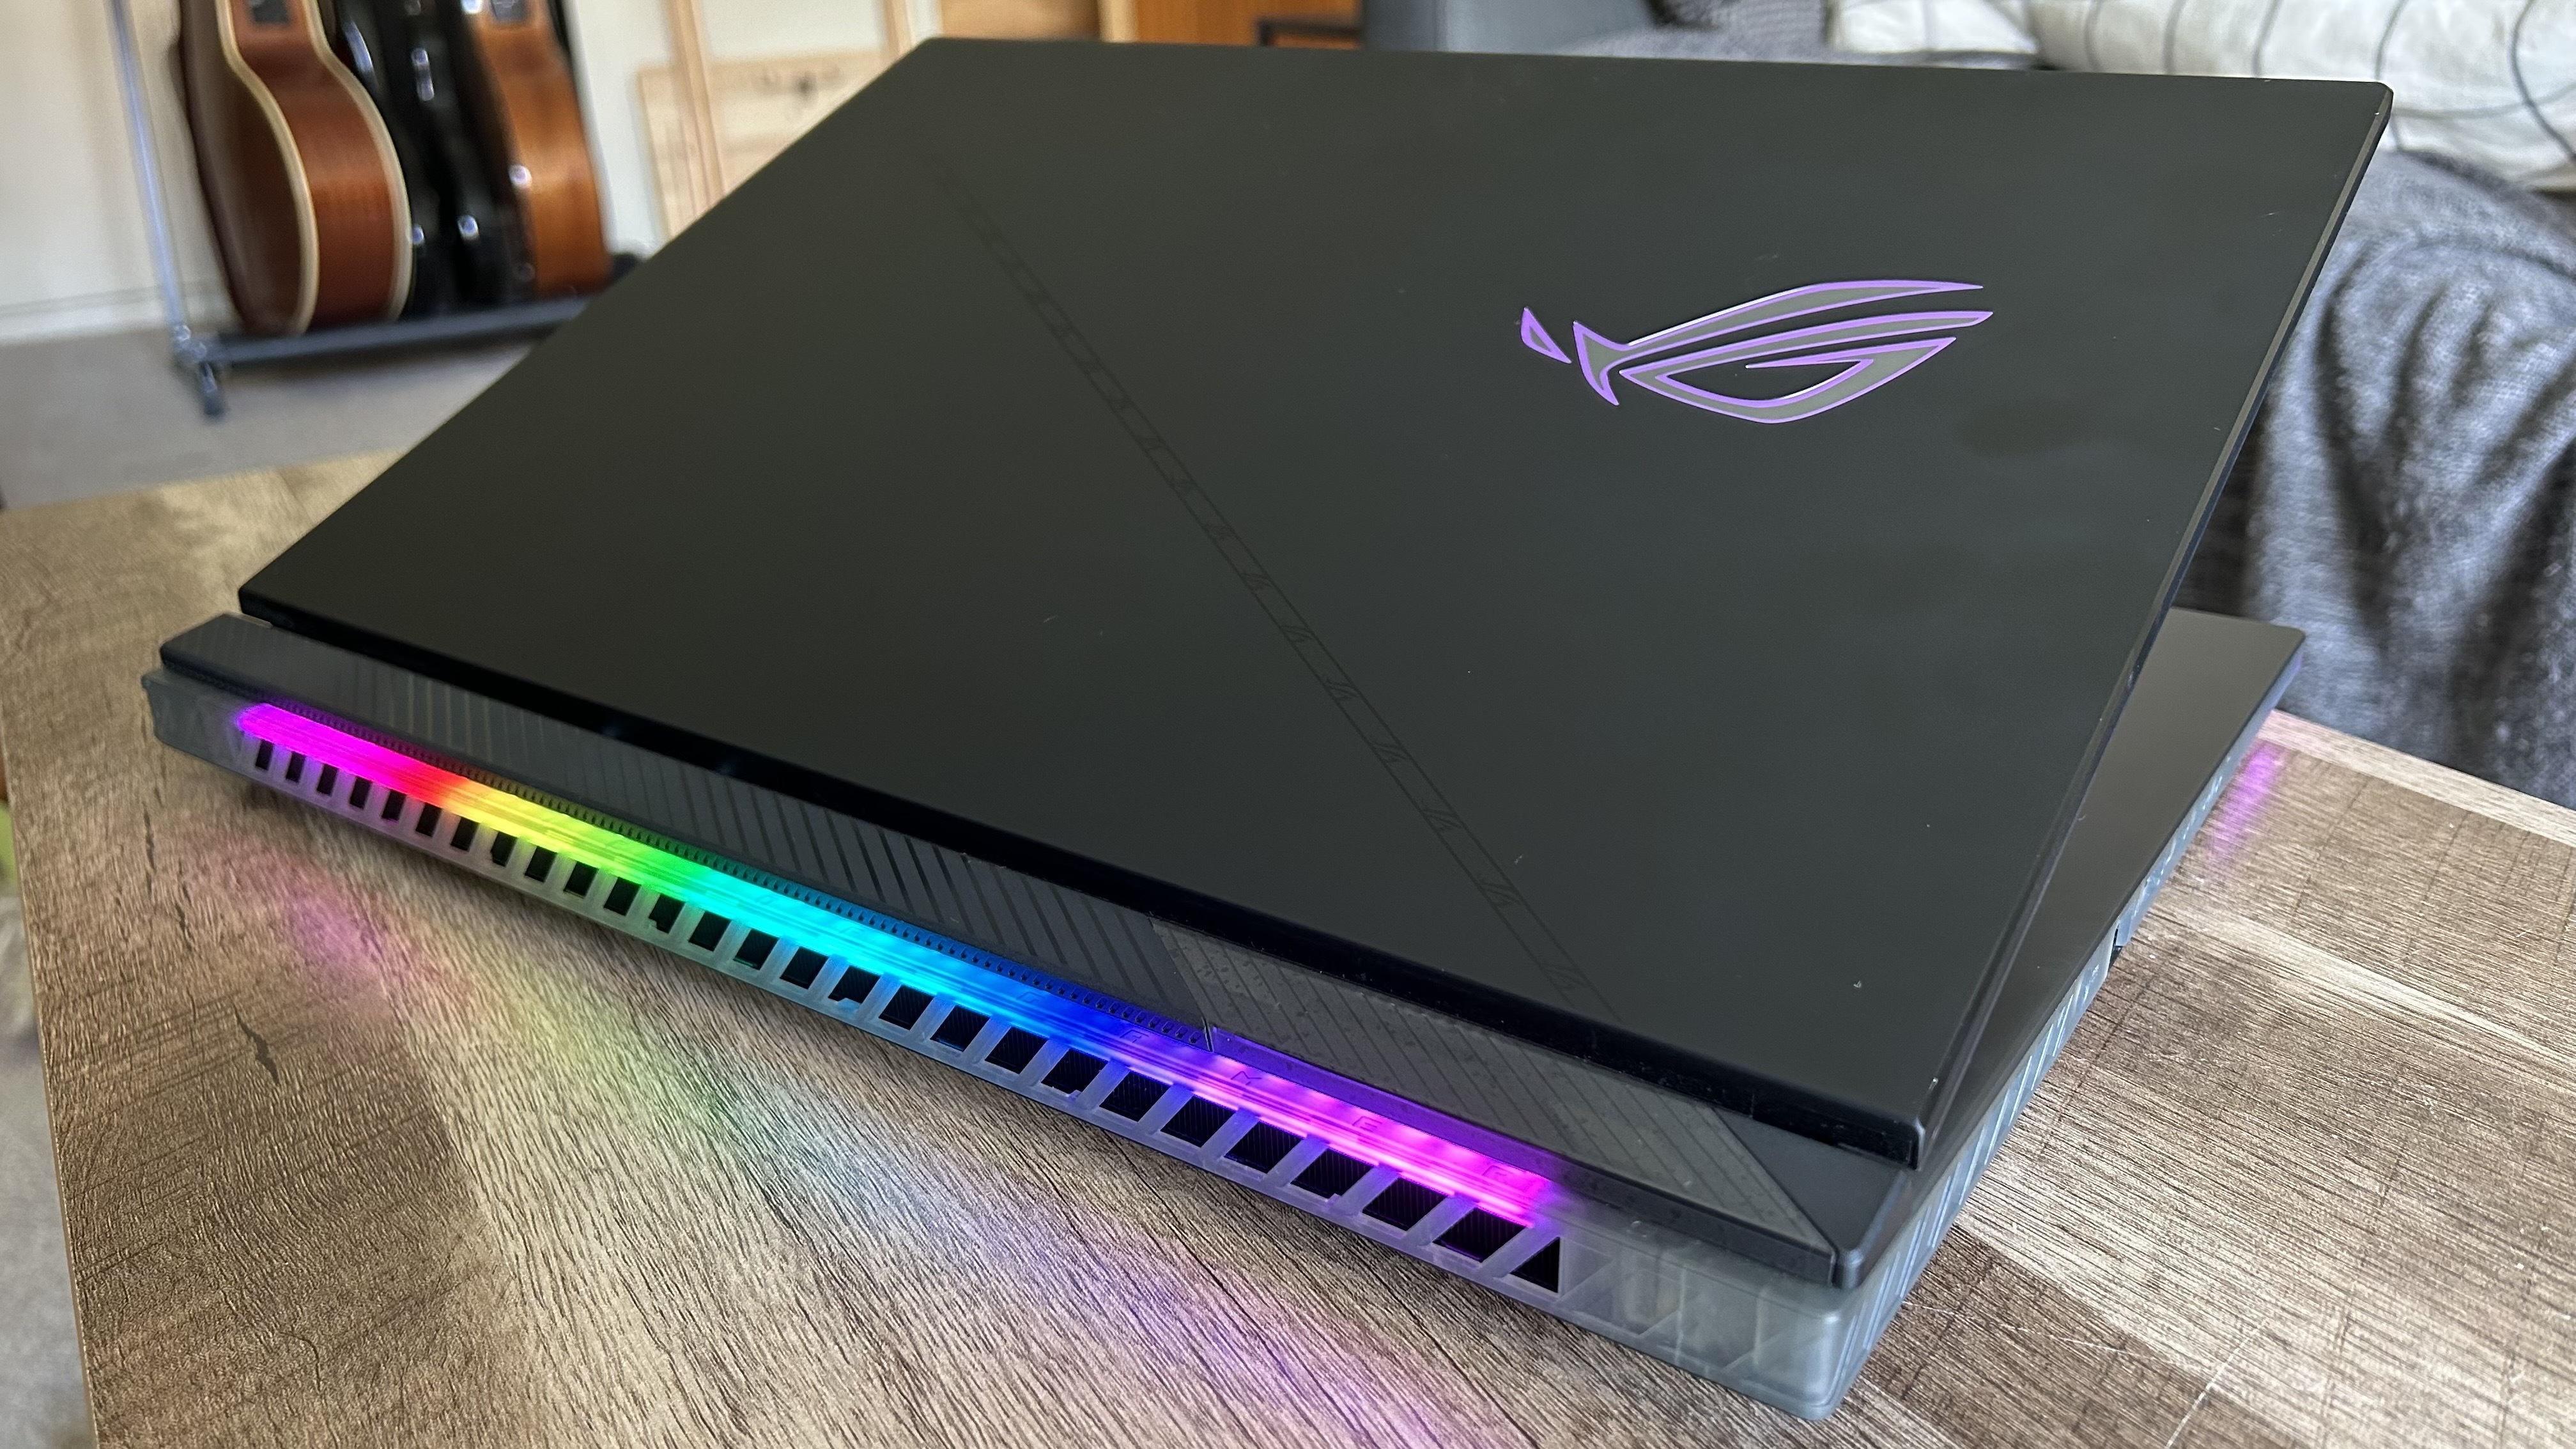 Asus ROG Strix Scar 18 review: the most powerful we've tested so